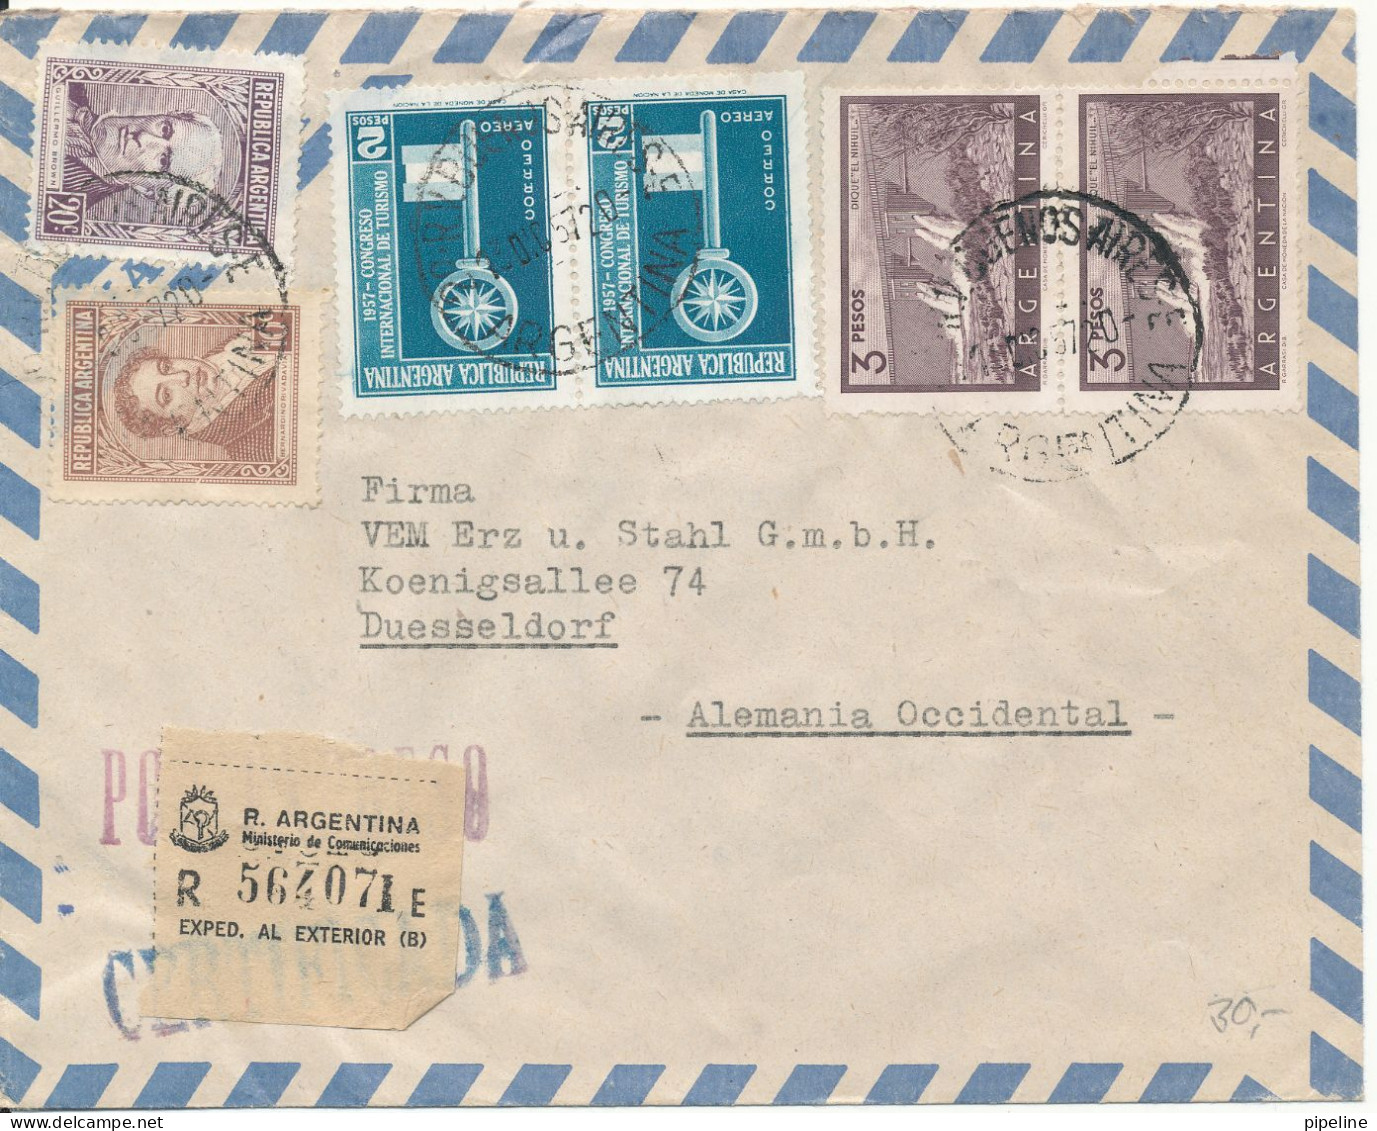 Argentina Registered Air Mail Cover Sent To Germany 23-12-1957 - Airmail